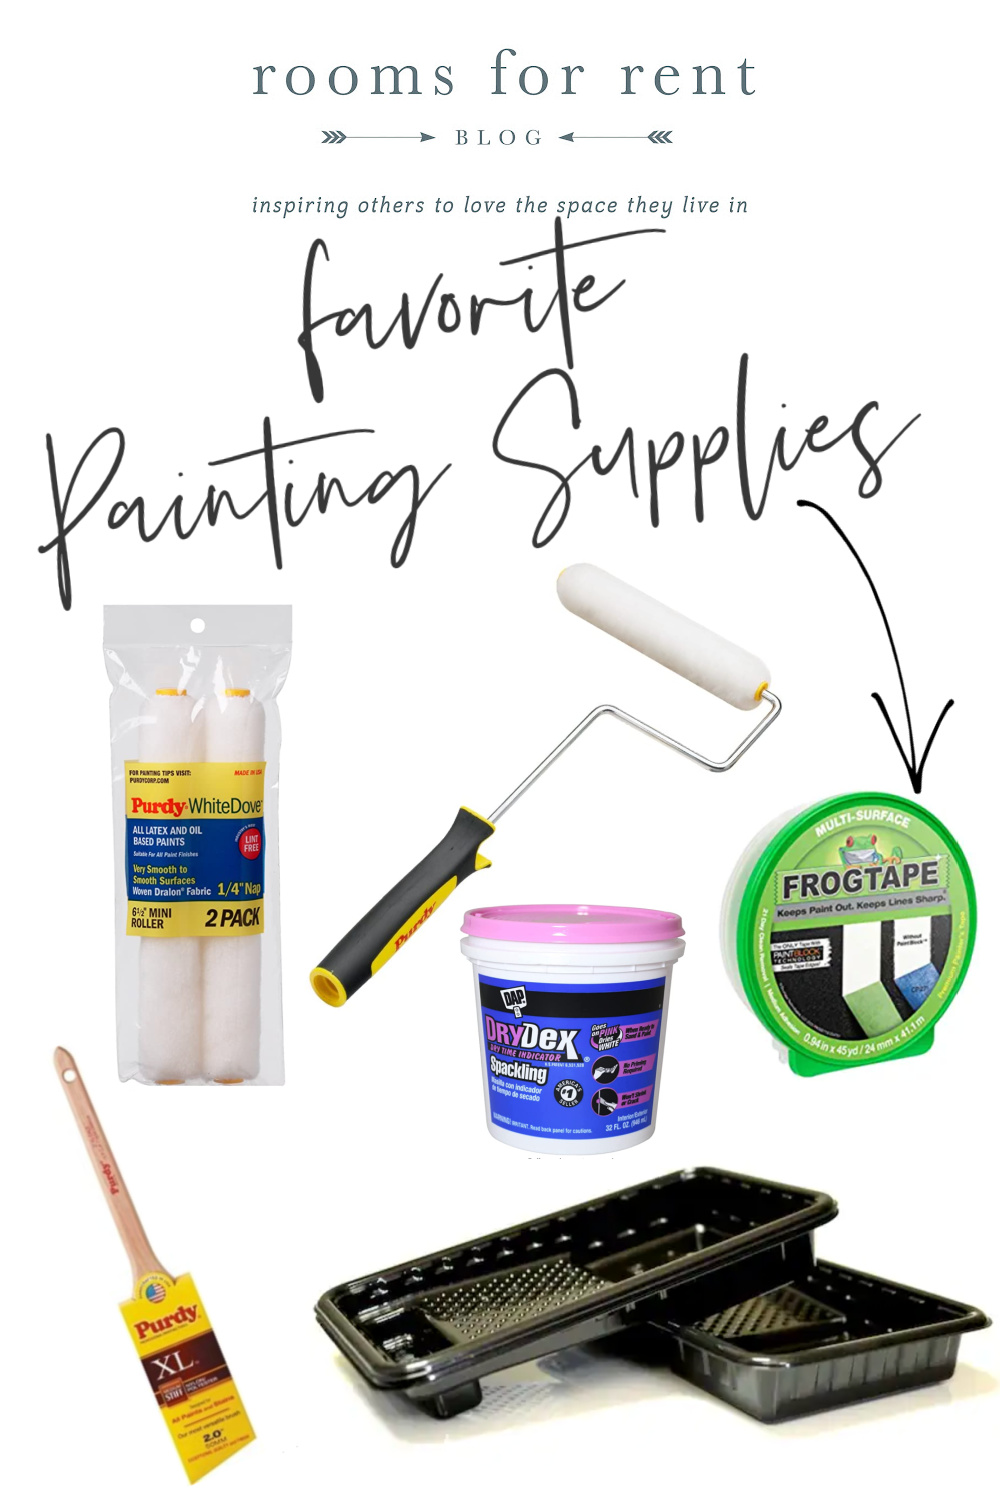 My Go-To Painting Tools - Rooms For Rent blog